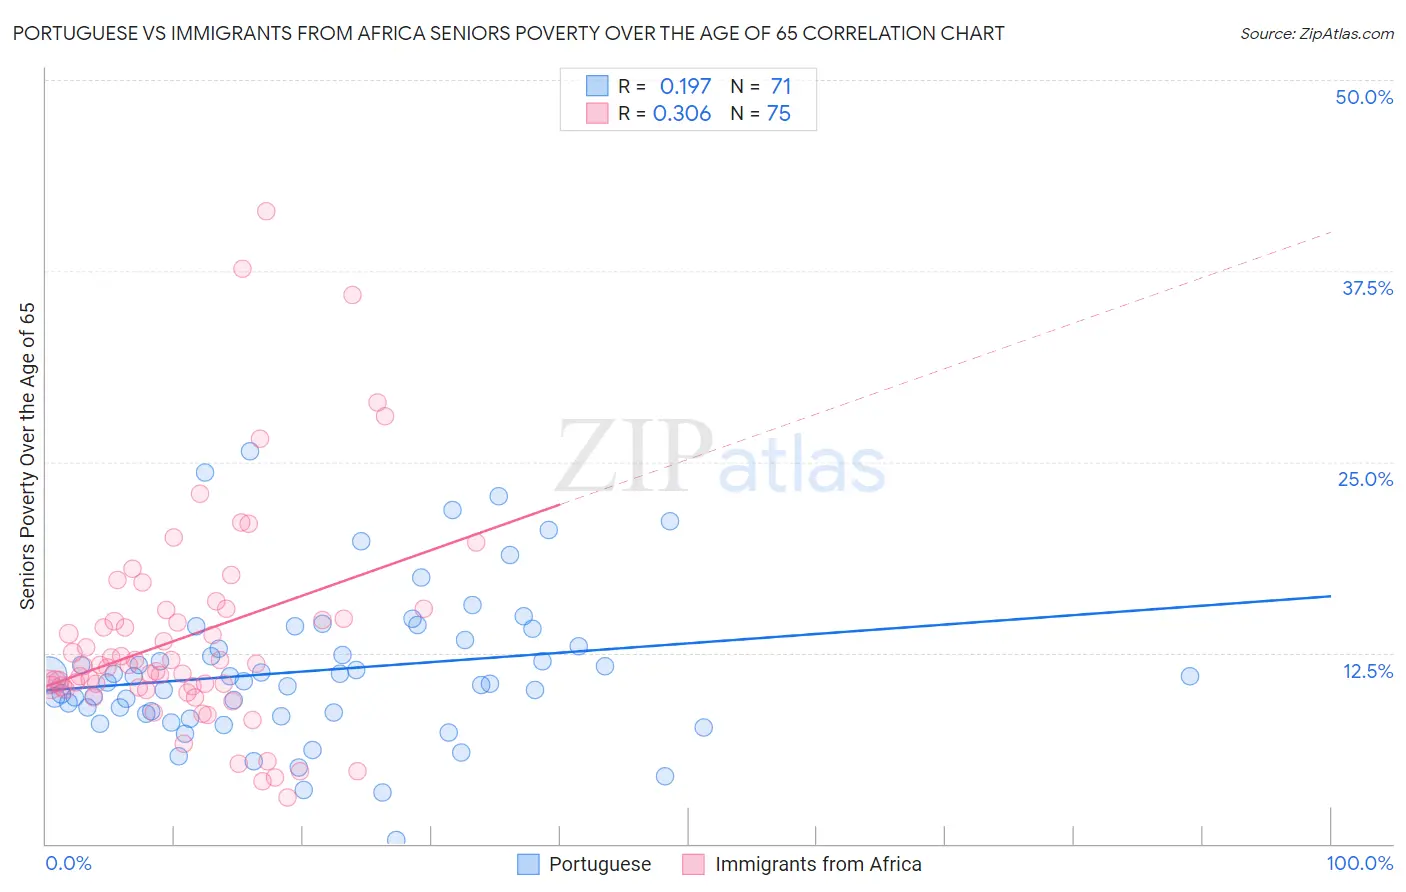 Portuguese vs Immigrants from Africa Seniors Poverty Over the Age of 65